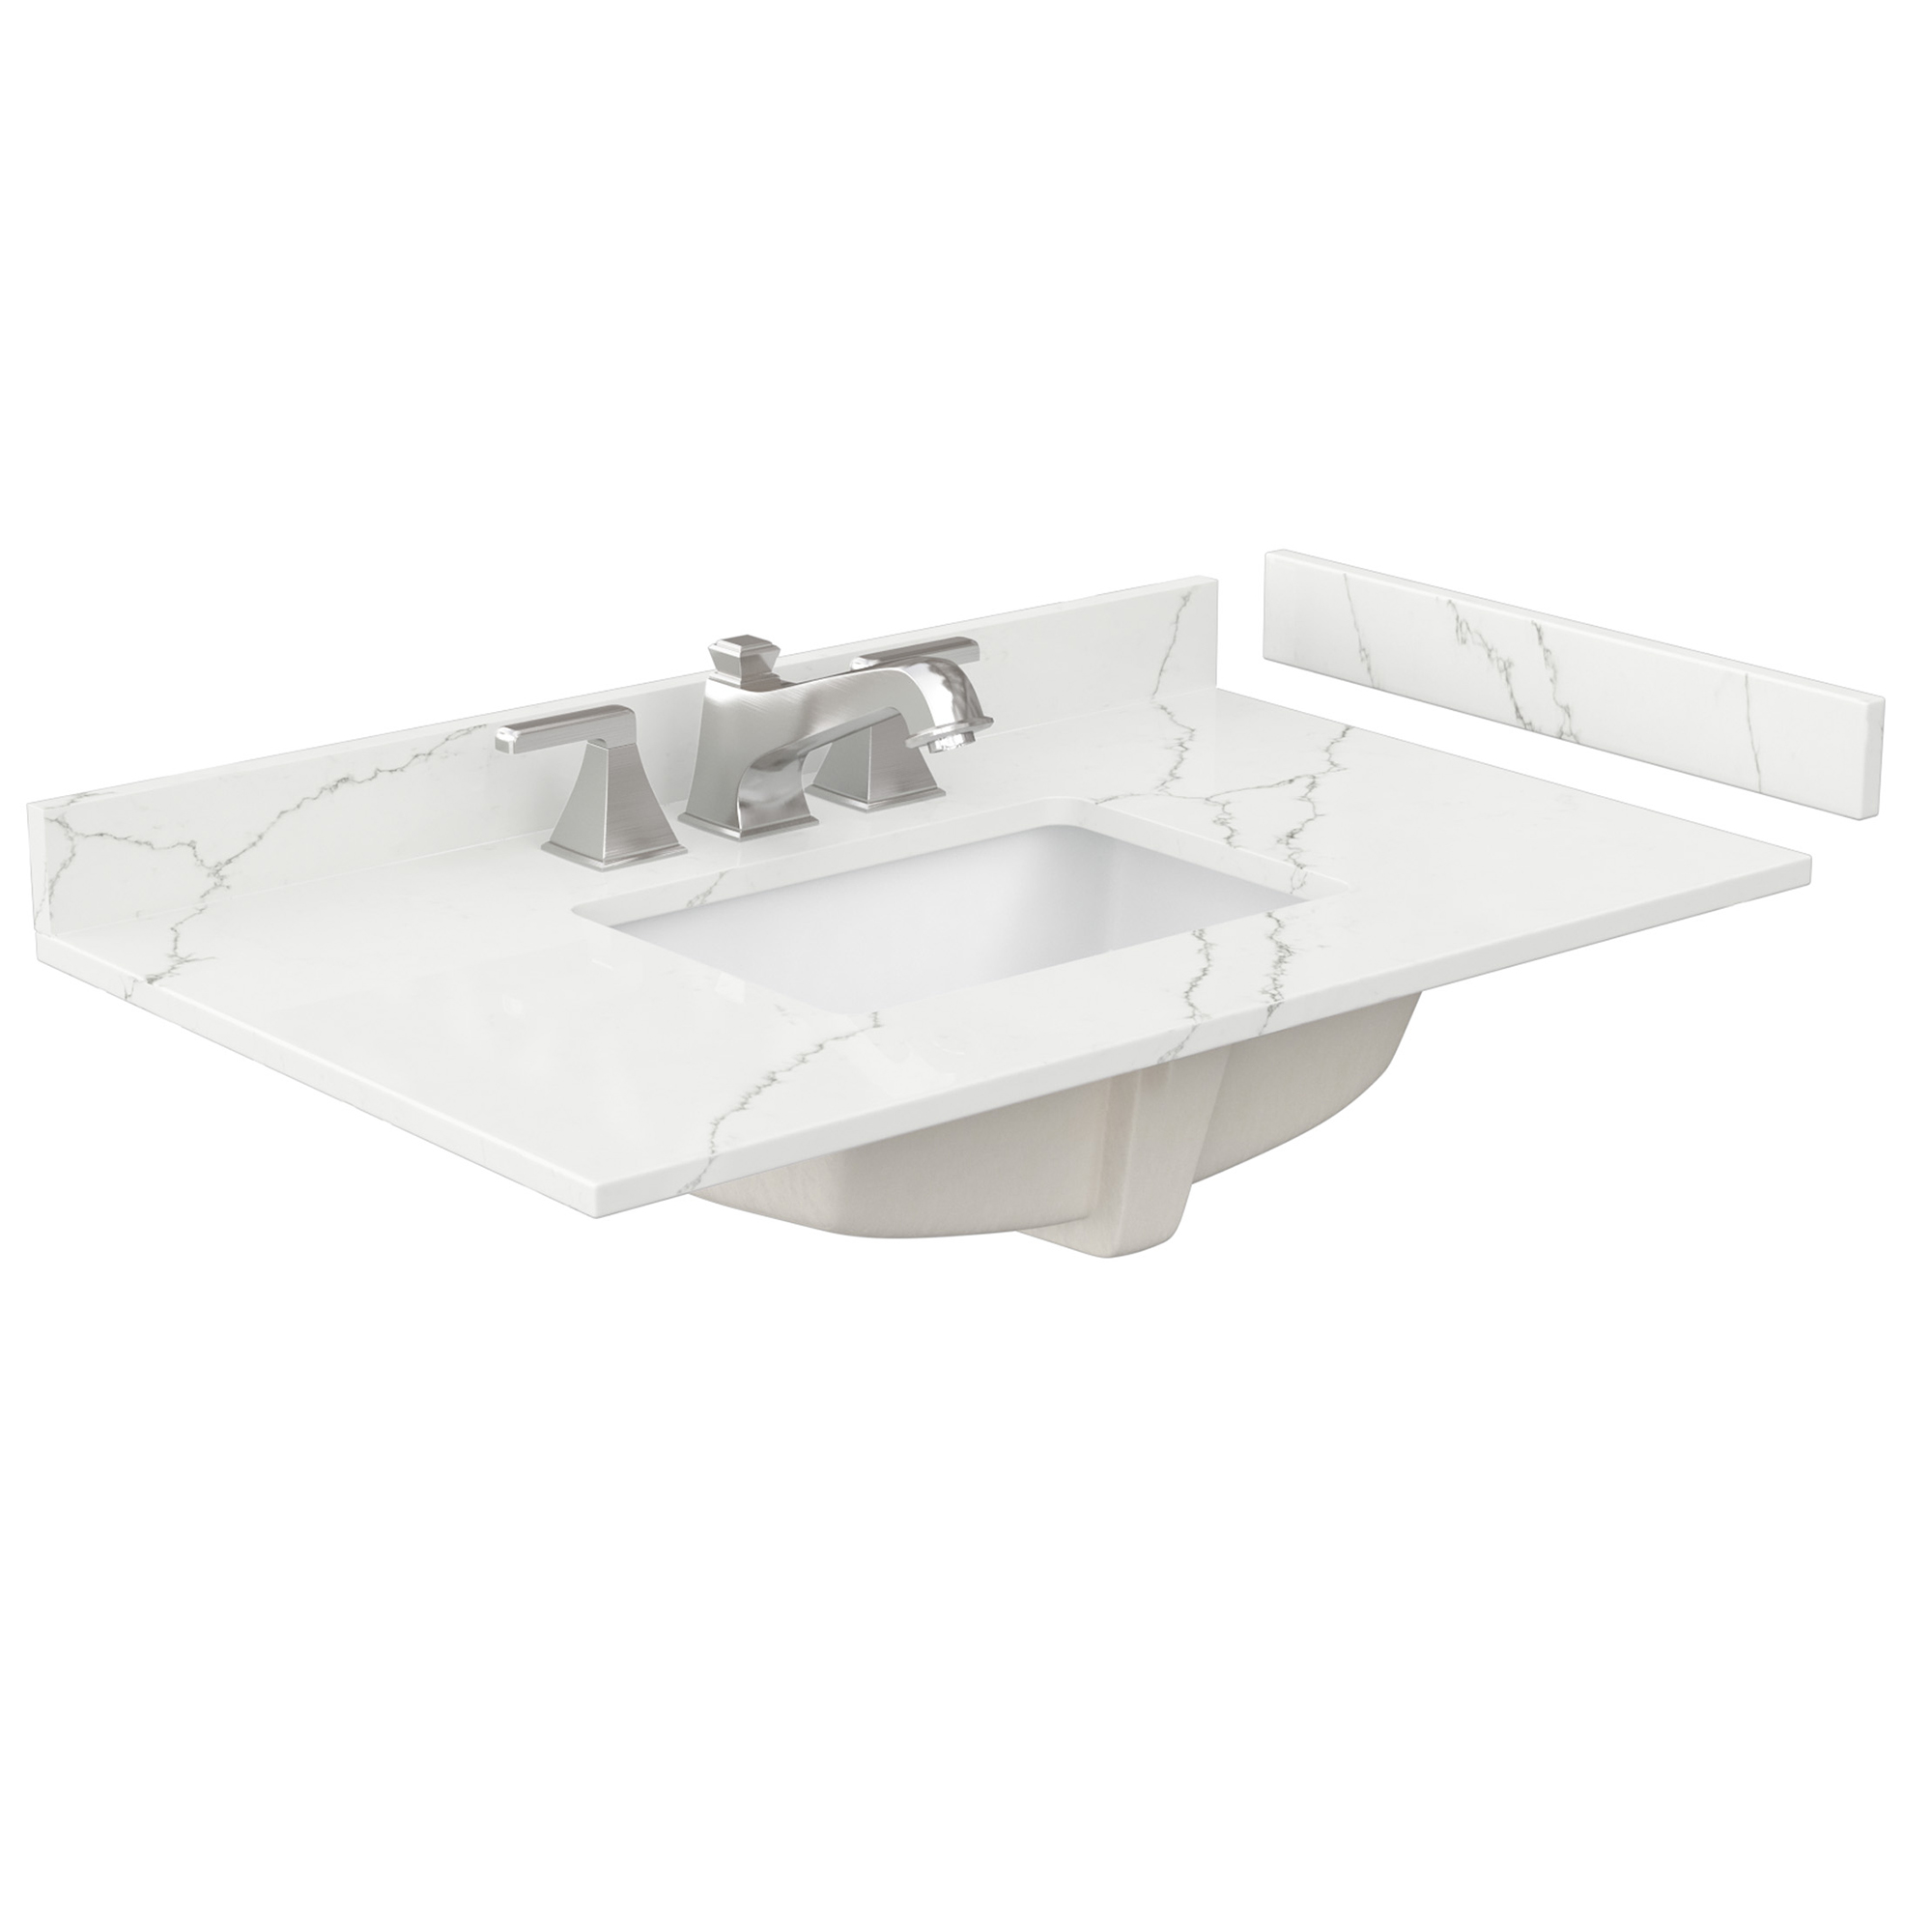 36" Single Countertop - Giotto Quartz (8066) with Undermount Square Sink (3-Hole) - Includes Backsplash and Sidesplash WCFQC336STOPUNSGT